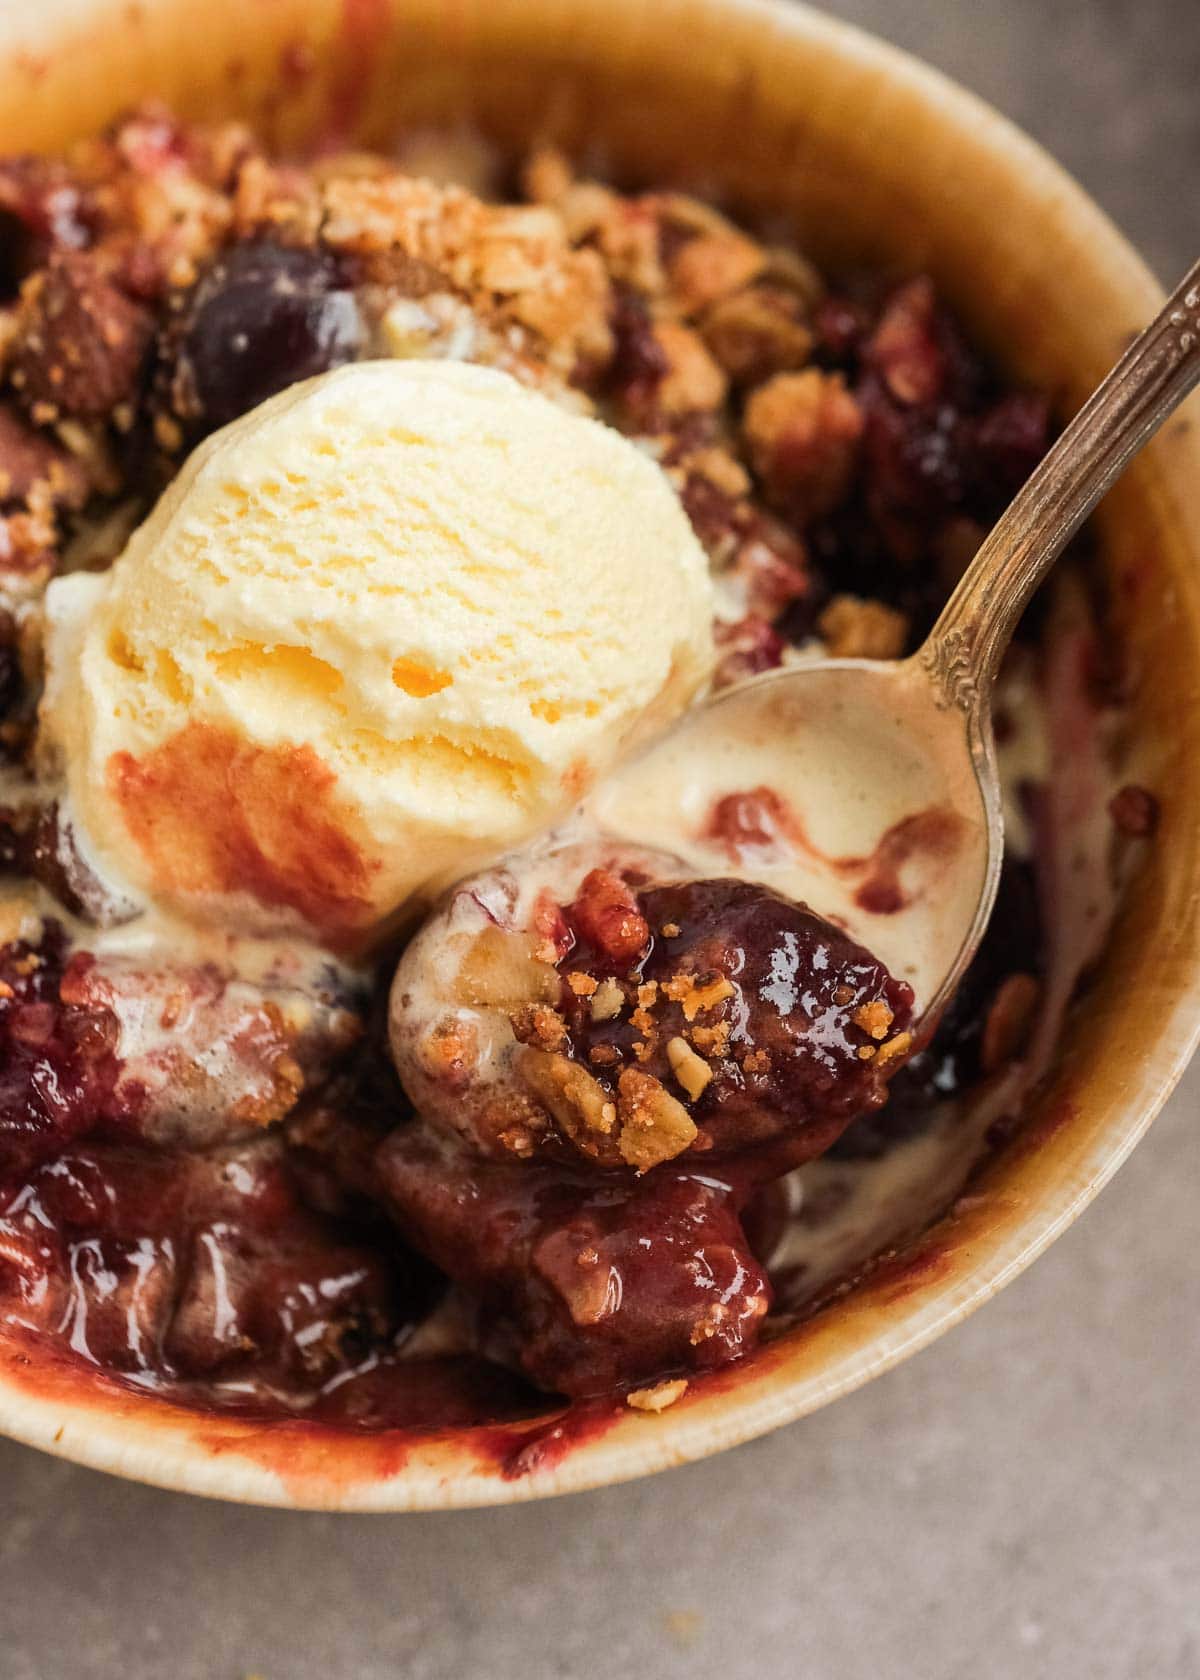 A spoonful of a cherry crisp with vanilla ice cream